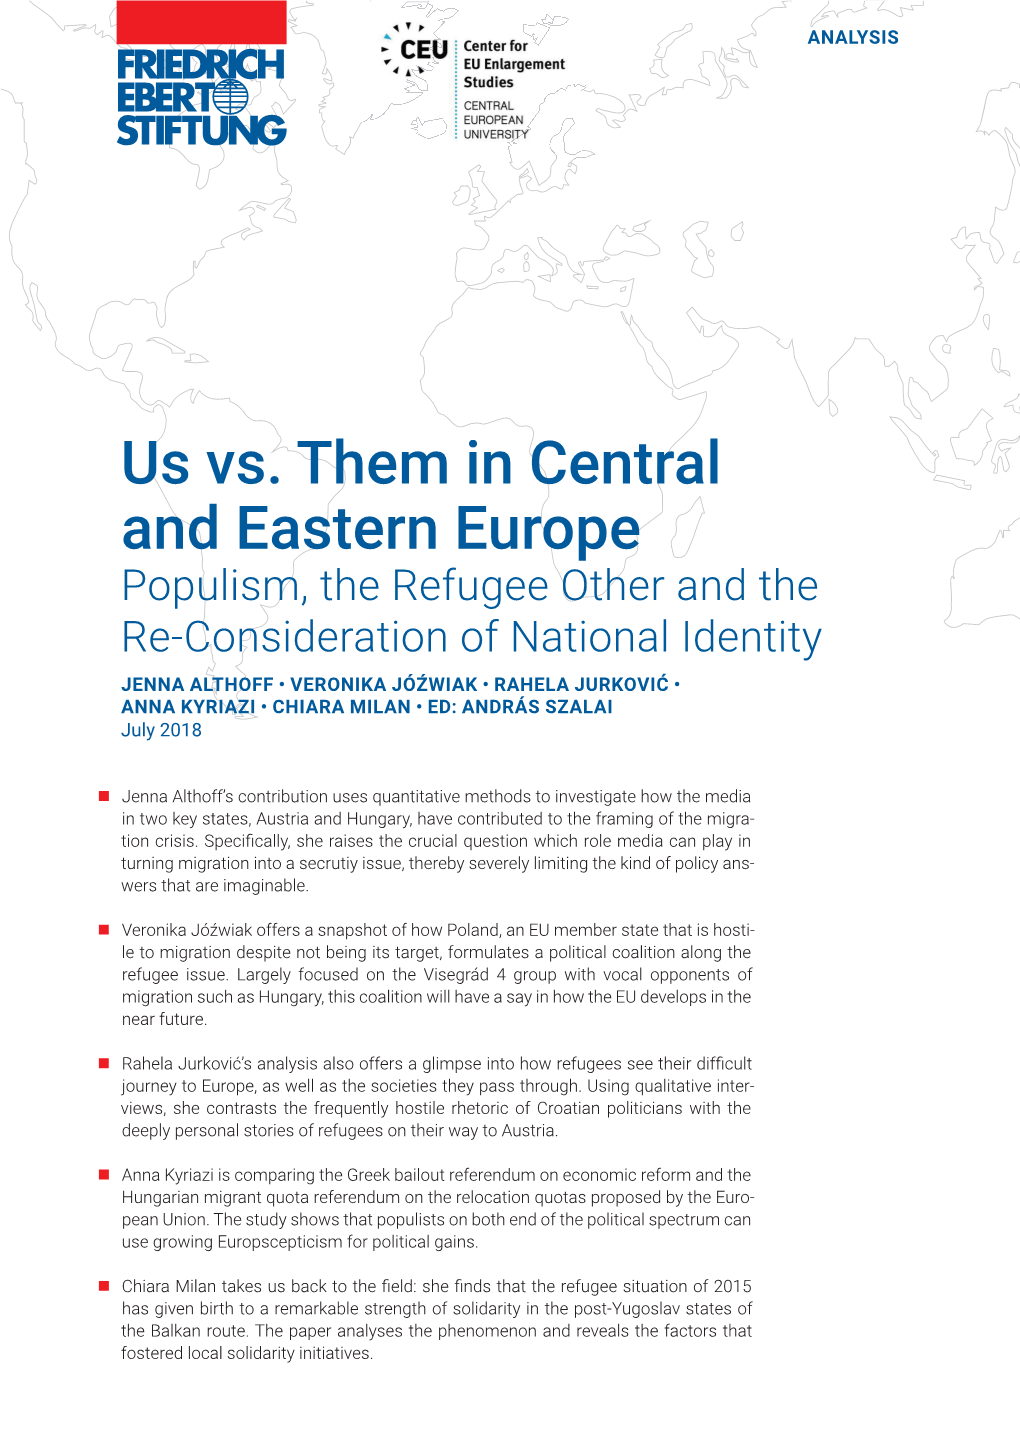 Us Vs. Them in Central and Eastern Europe